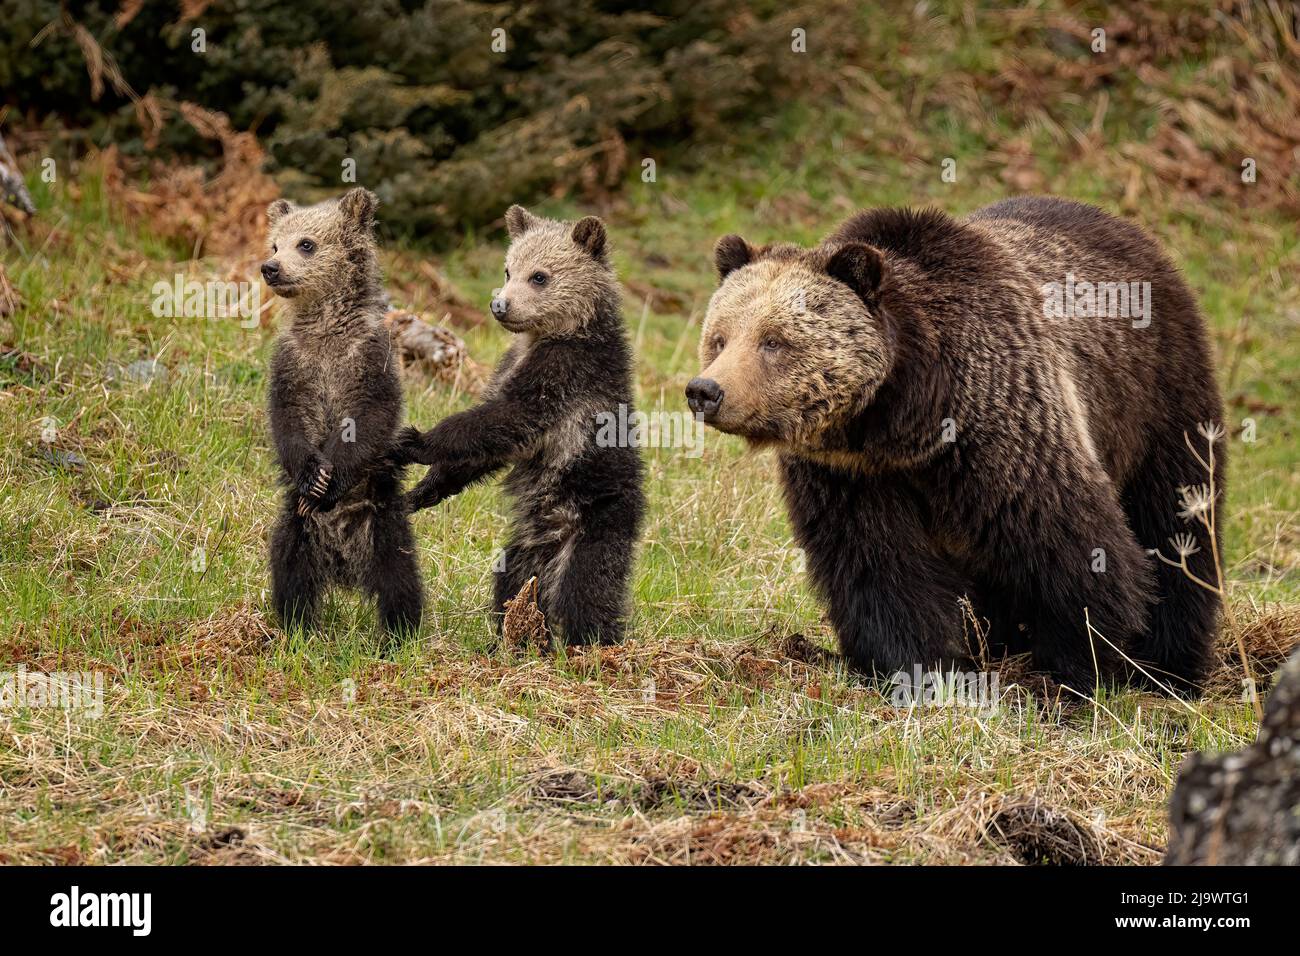 Grizzly bear with cubs Stock Photo